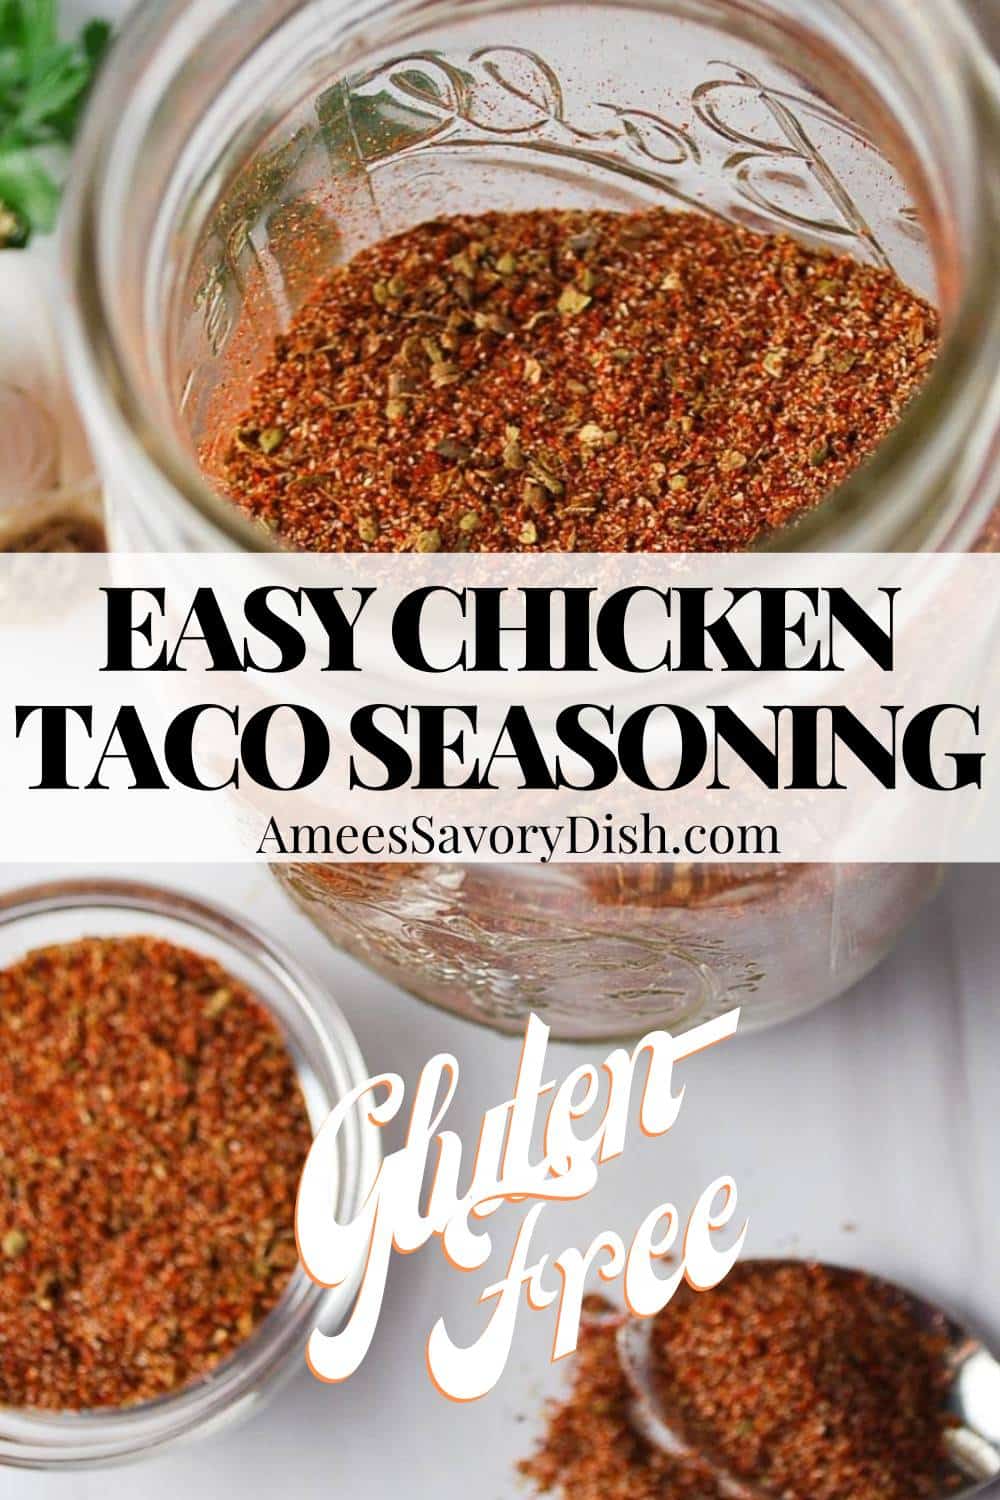 This easy chicken taco seasoning is just as flavorful and convenient as taco seasoning packets without any gluten or preservatives. via @Ameessavorydish